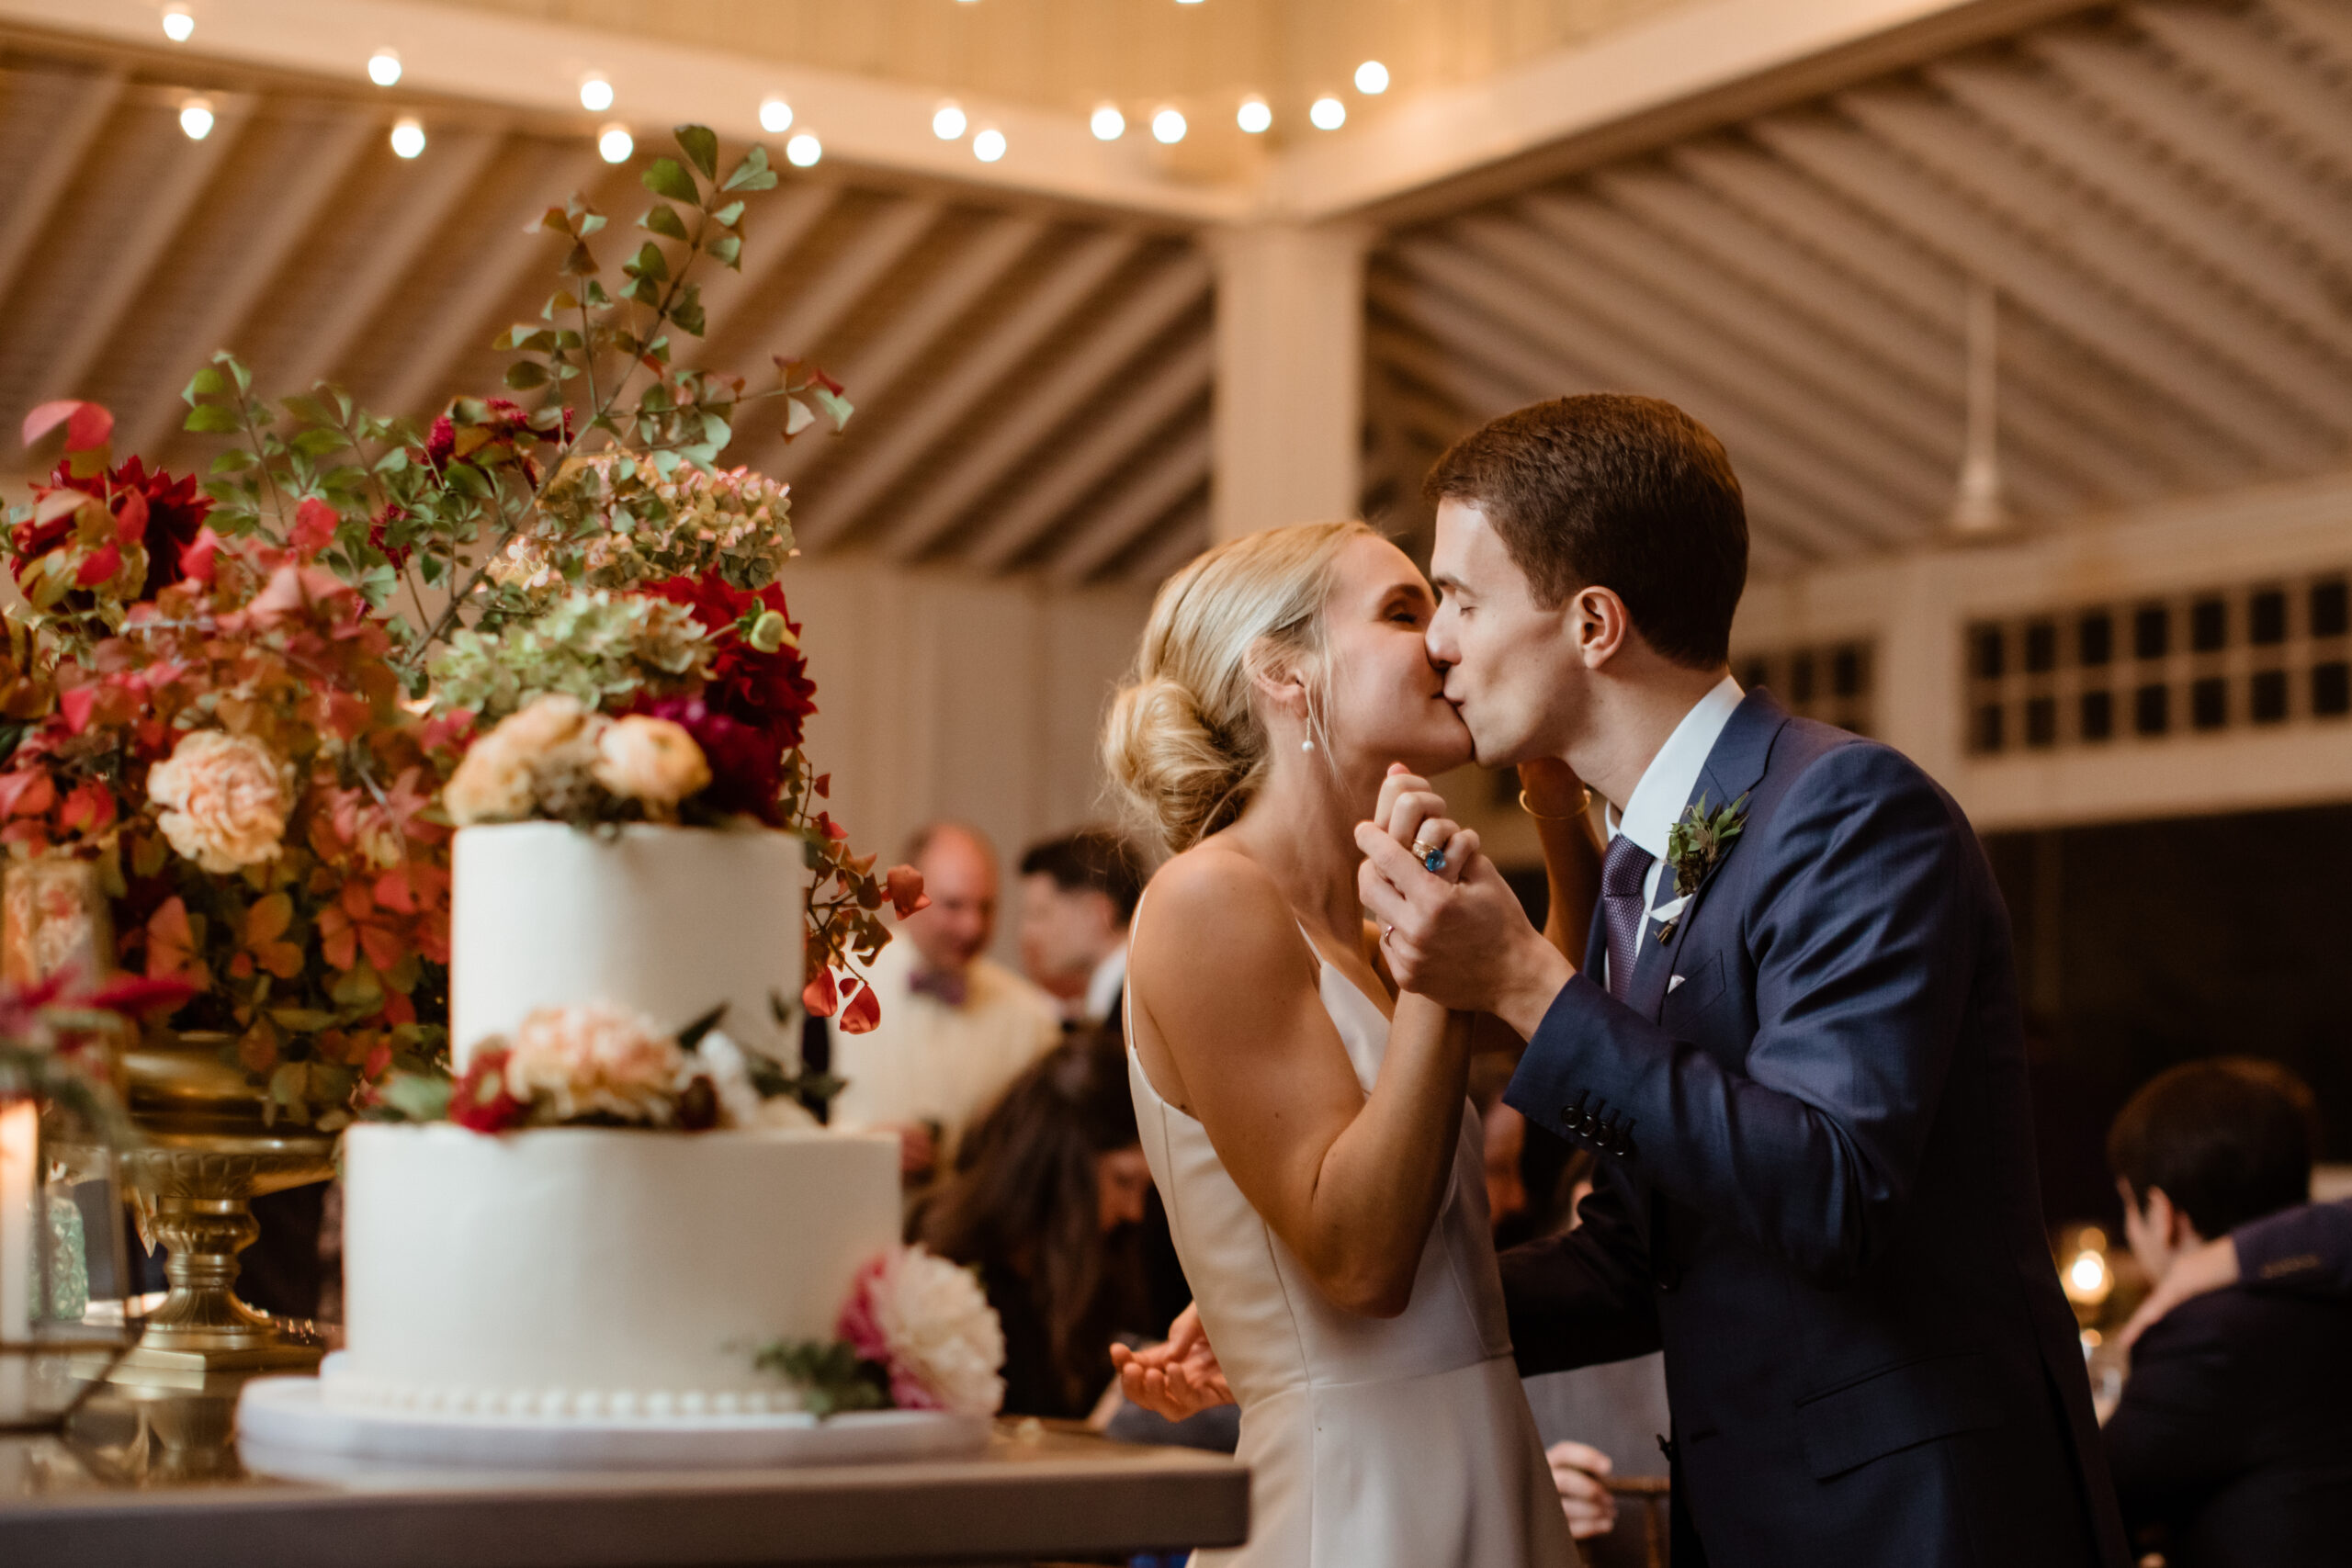 Stunning bride and groom share a kiss during their dreamy wedding day